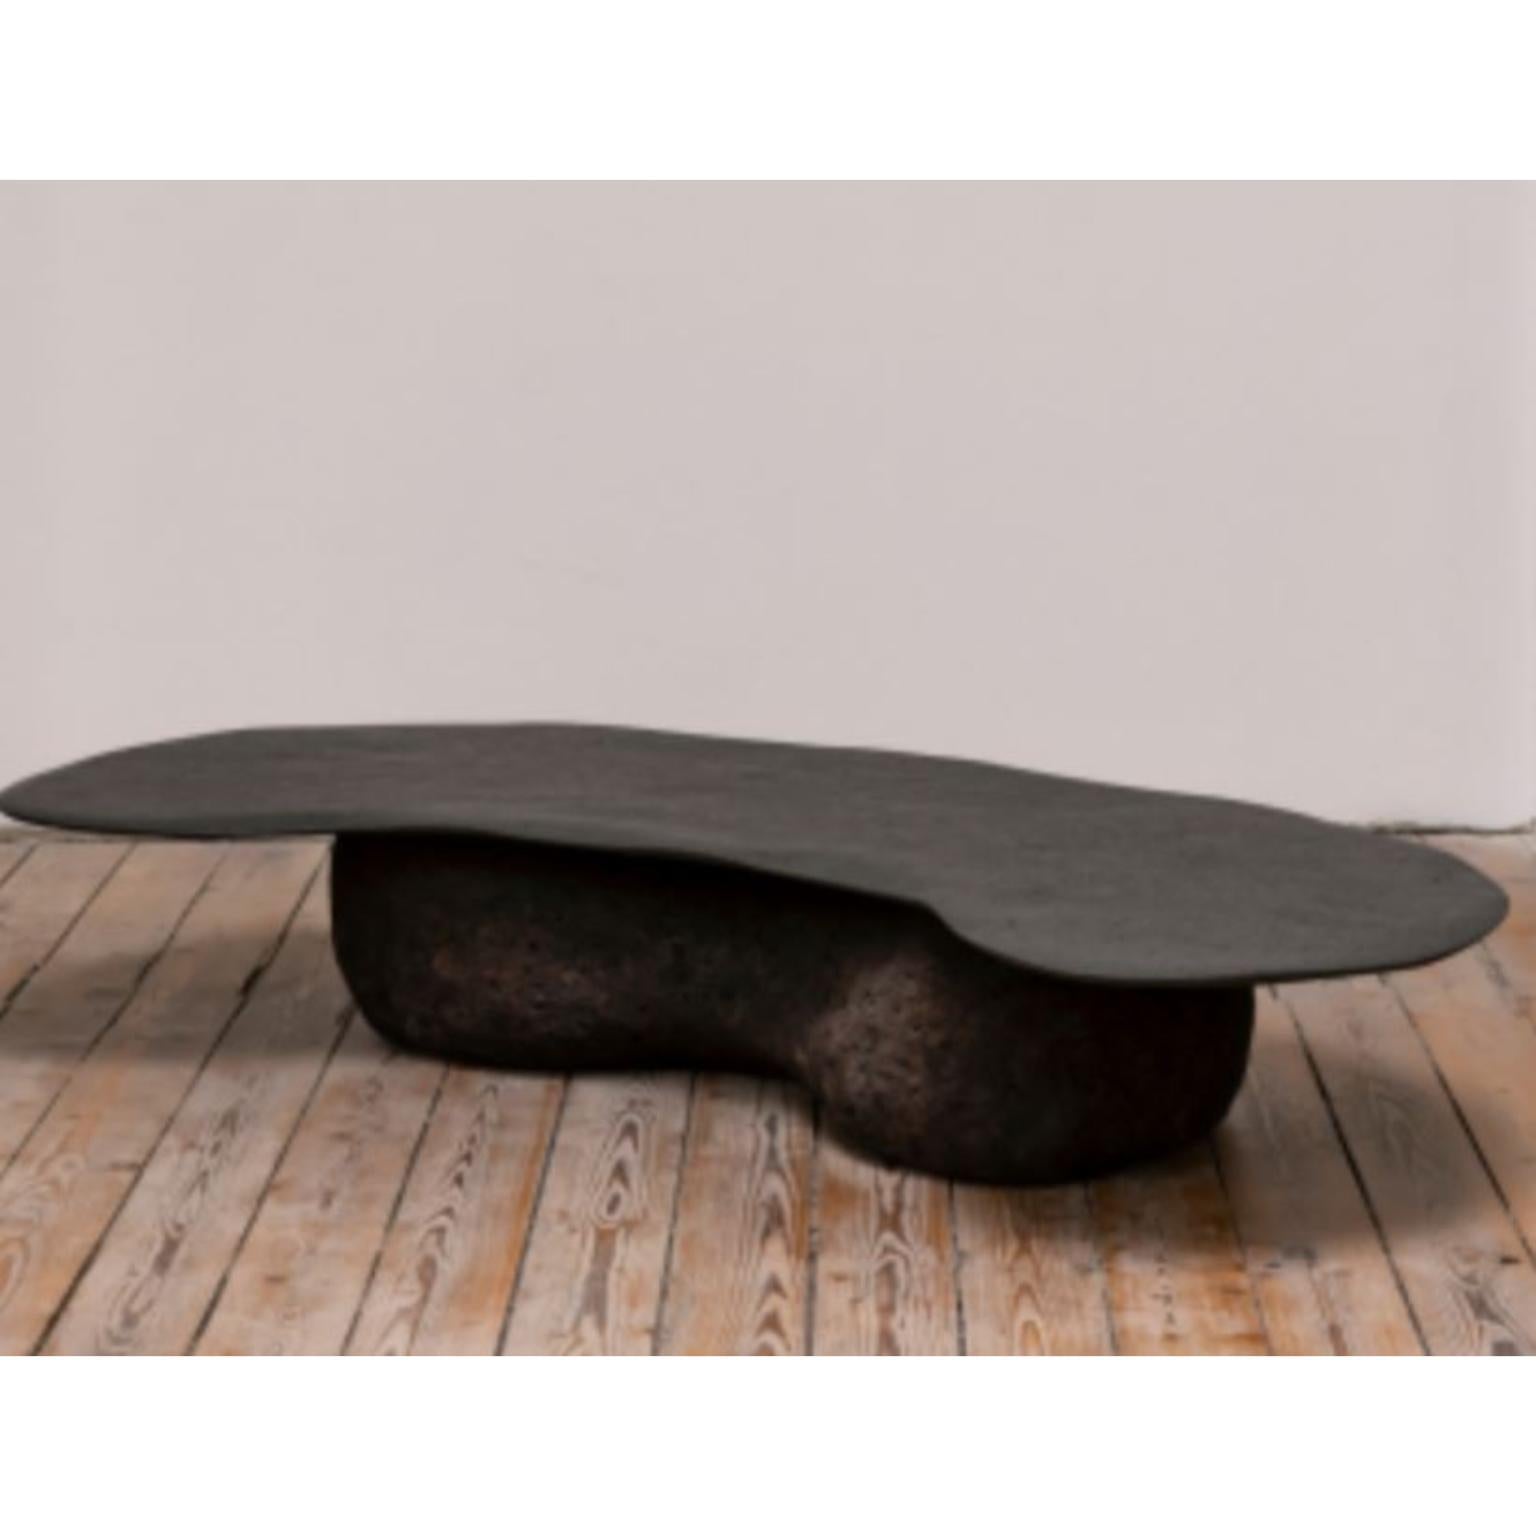 Black Rock Dining Table by Atelier Benoit Viaene
Dimensions: D 76 x W 152 x H 35 cm.
Materials: Wood, Black Rock.

Benoit Viaene is originally from Kortrijk and now works and lives in Ghent.
He is a graduated Architect of the Henry Van de Velde